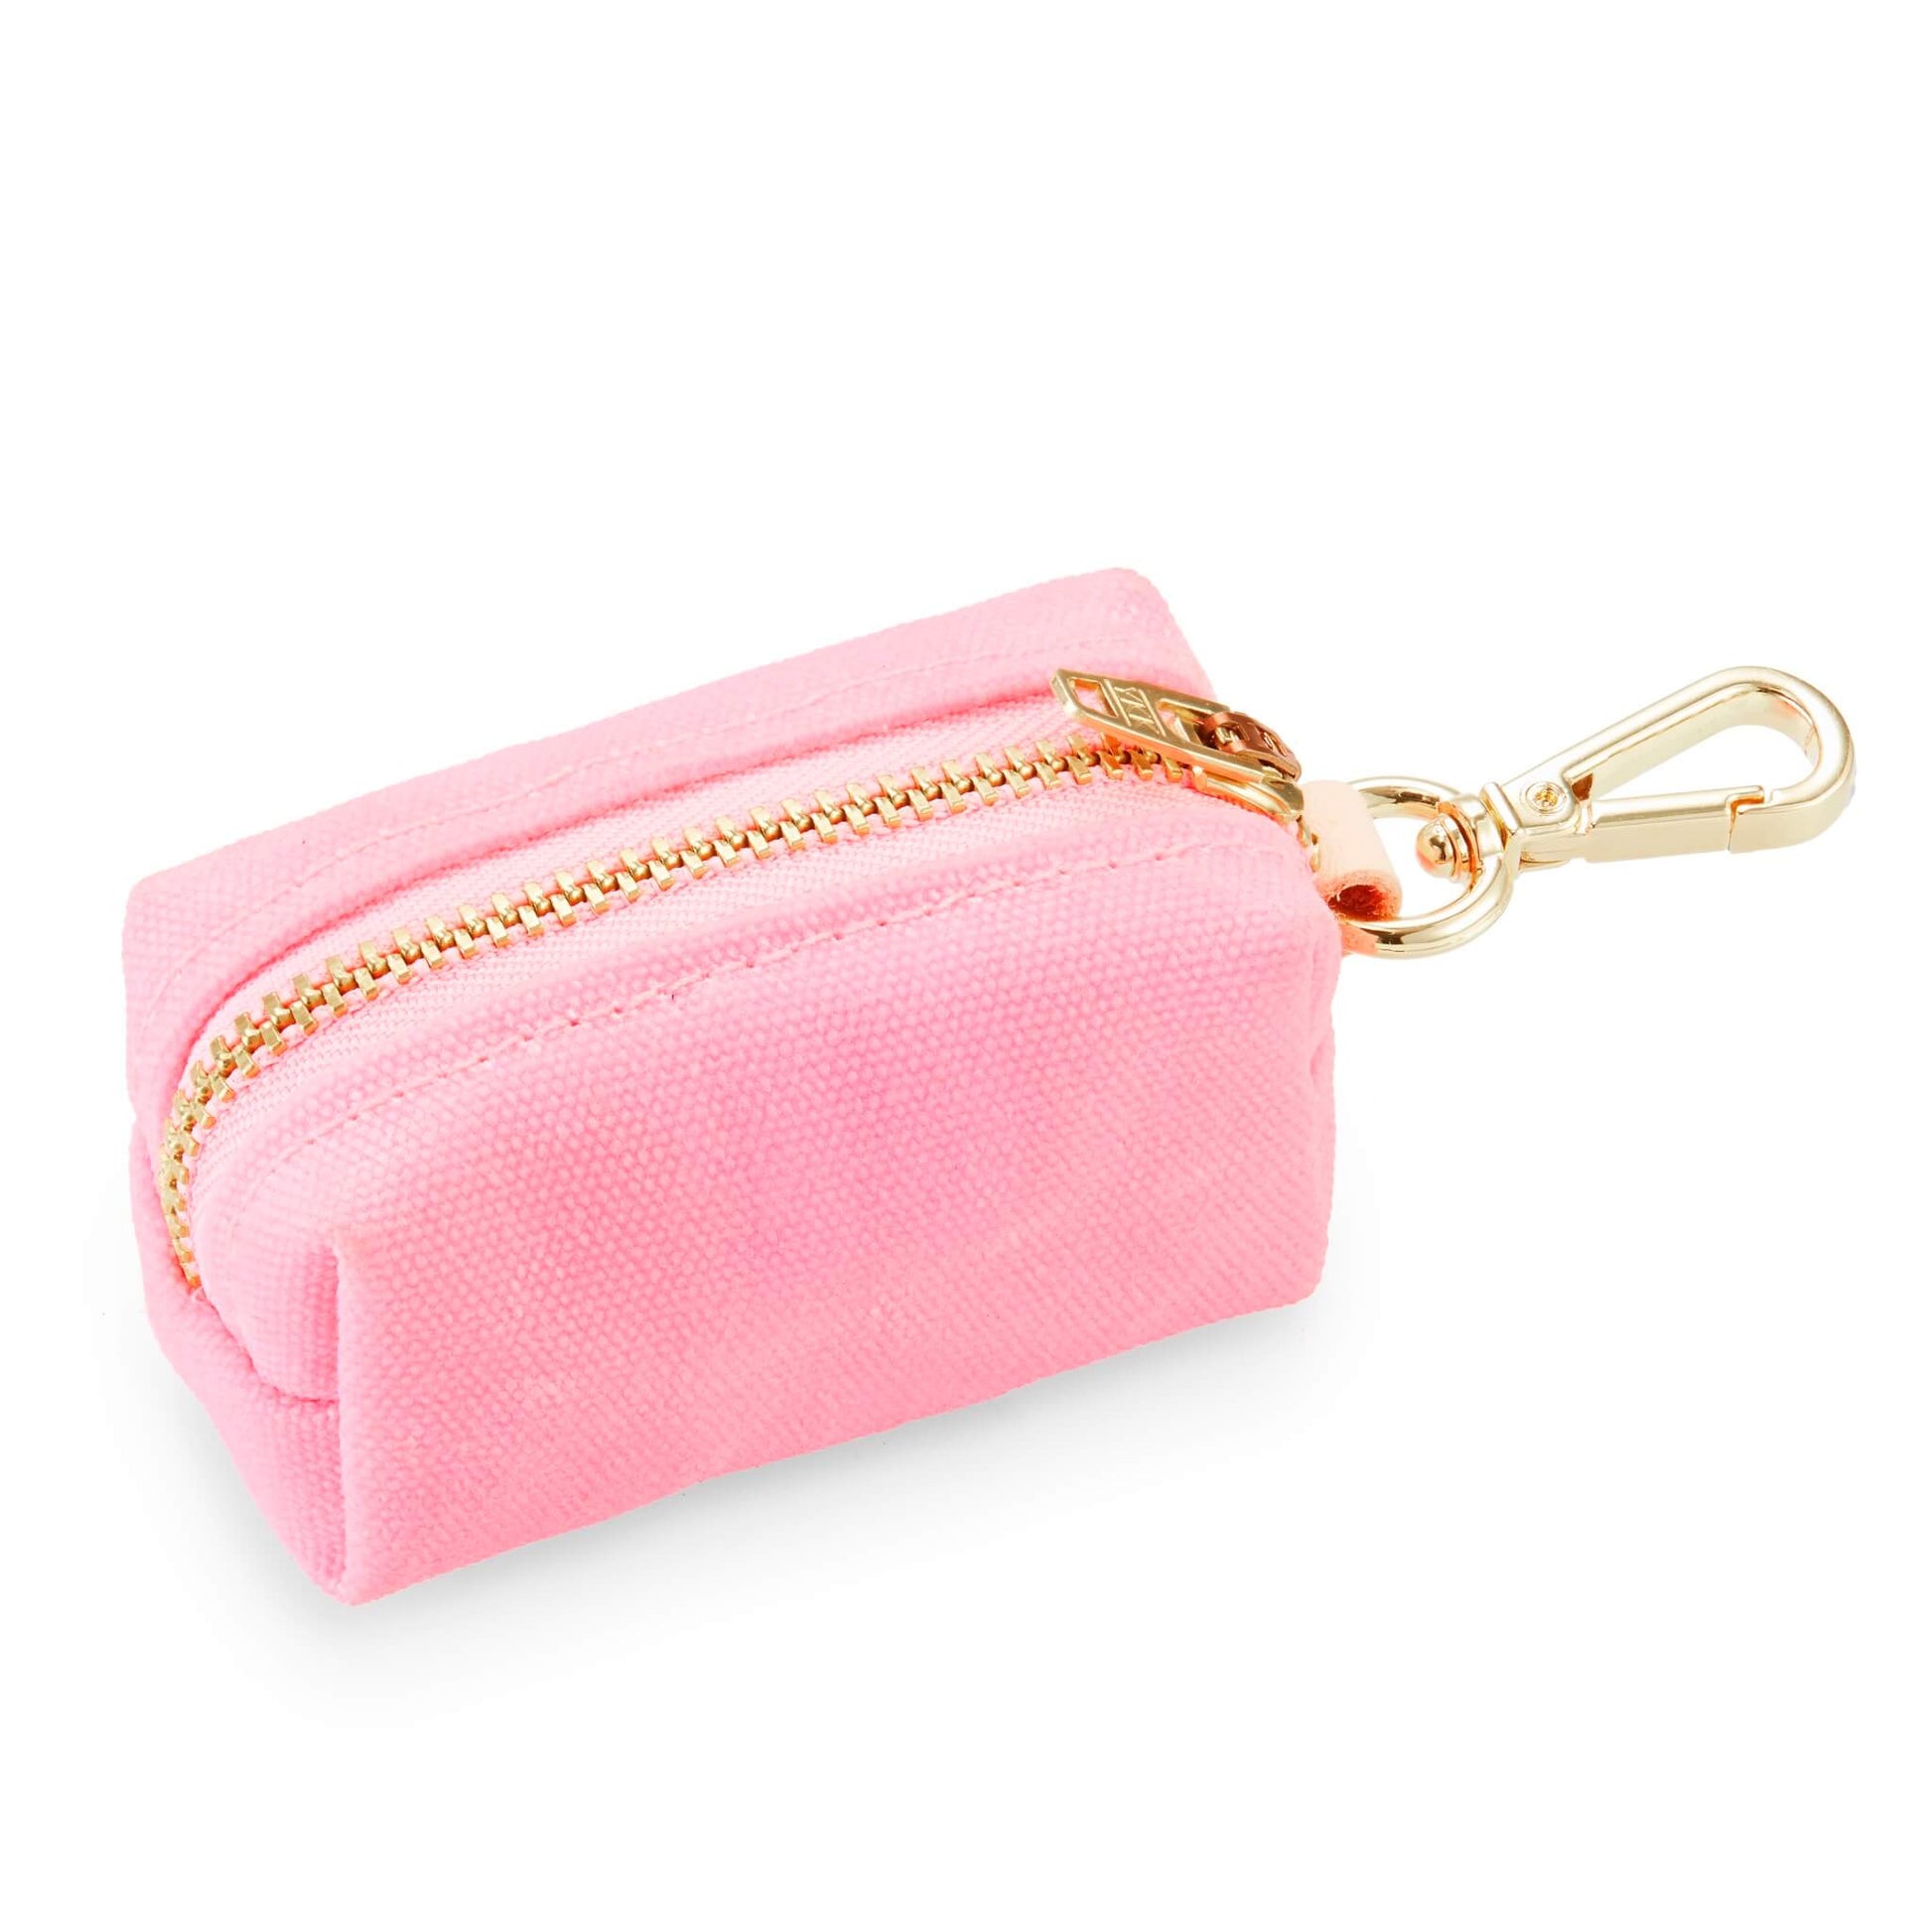 Petal Pink Waxed Canvas Waste Bag Dispenser from The Foggy Dog 